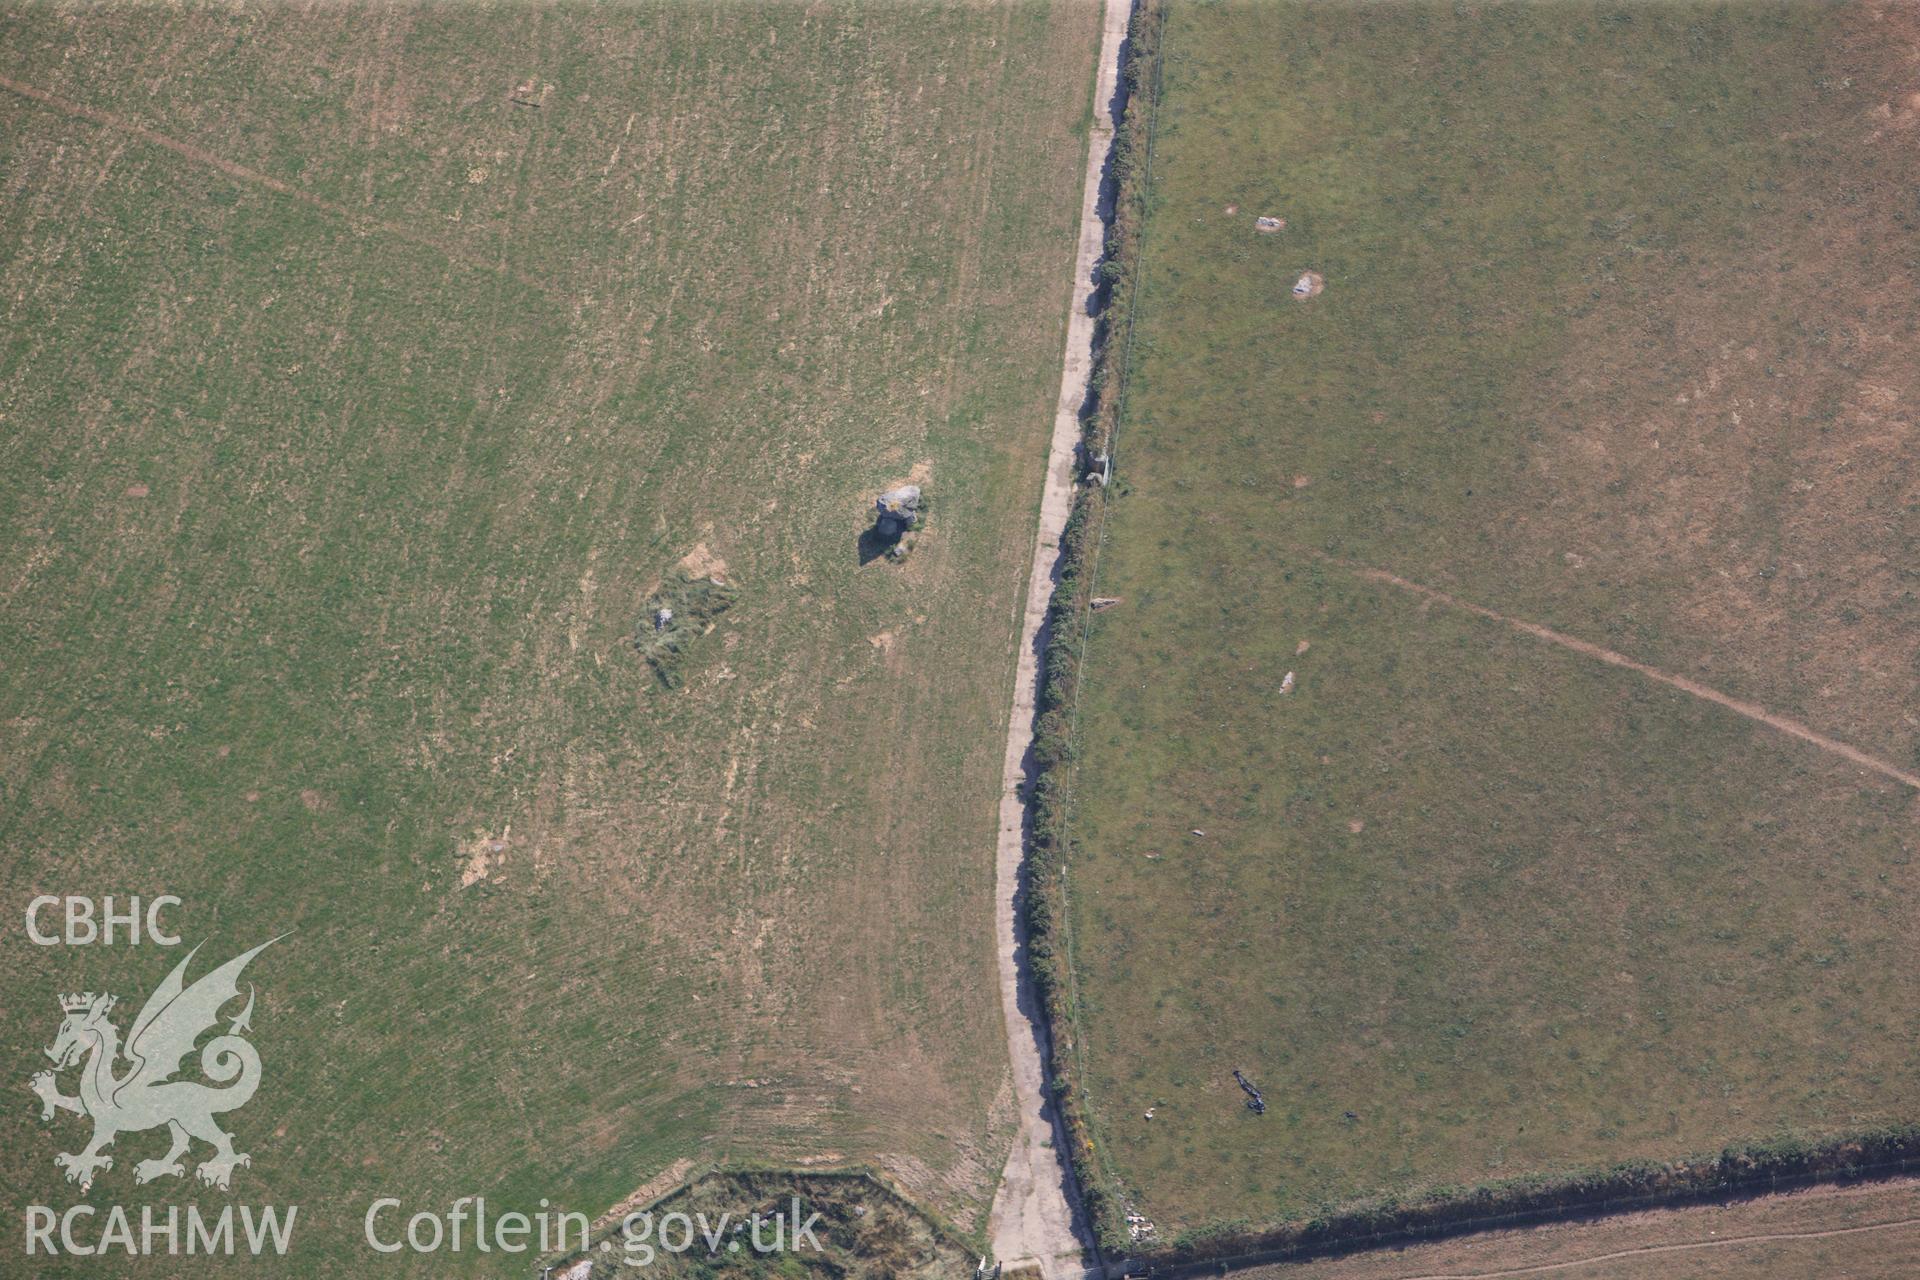 Carreg Sampson Burial Chamber, south west of Fishguard. Oblique aerial photograph taken during the Royal Commission?s programme of archaeological aerial reconnaissance by Toby Driver on 16th July 2013.